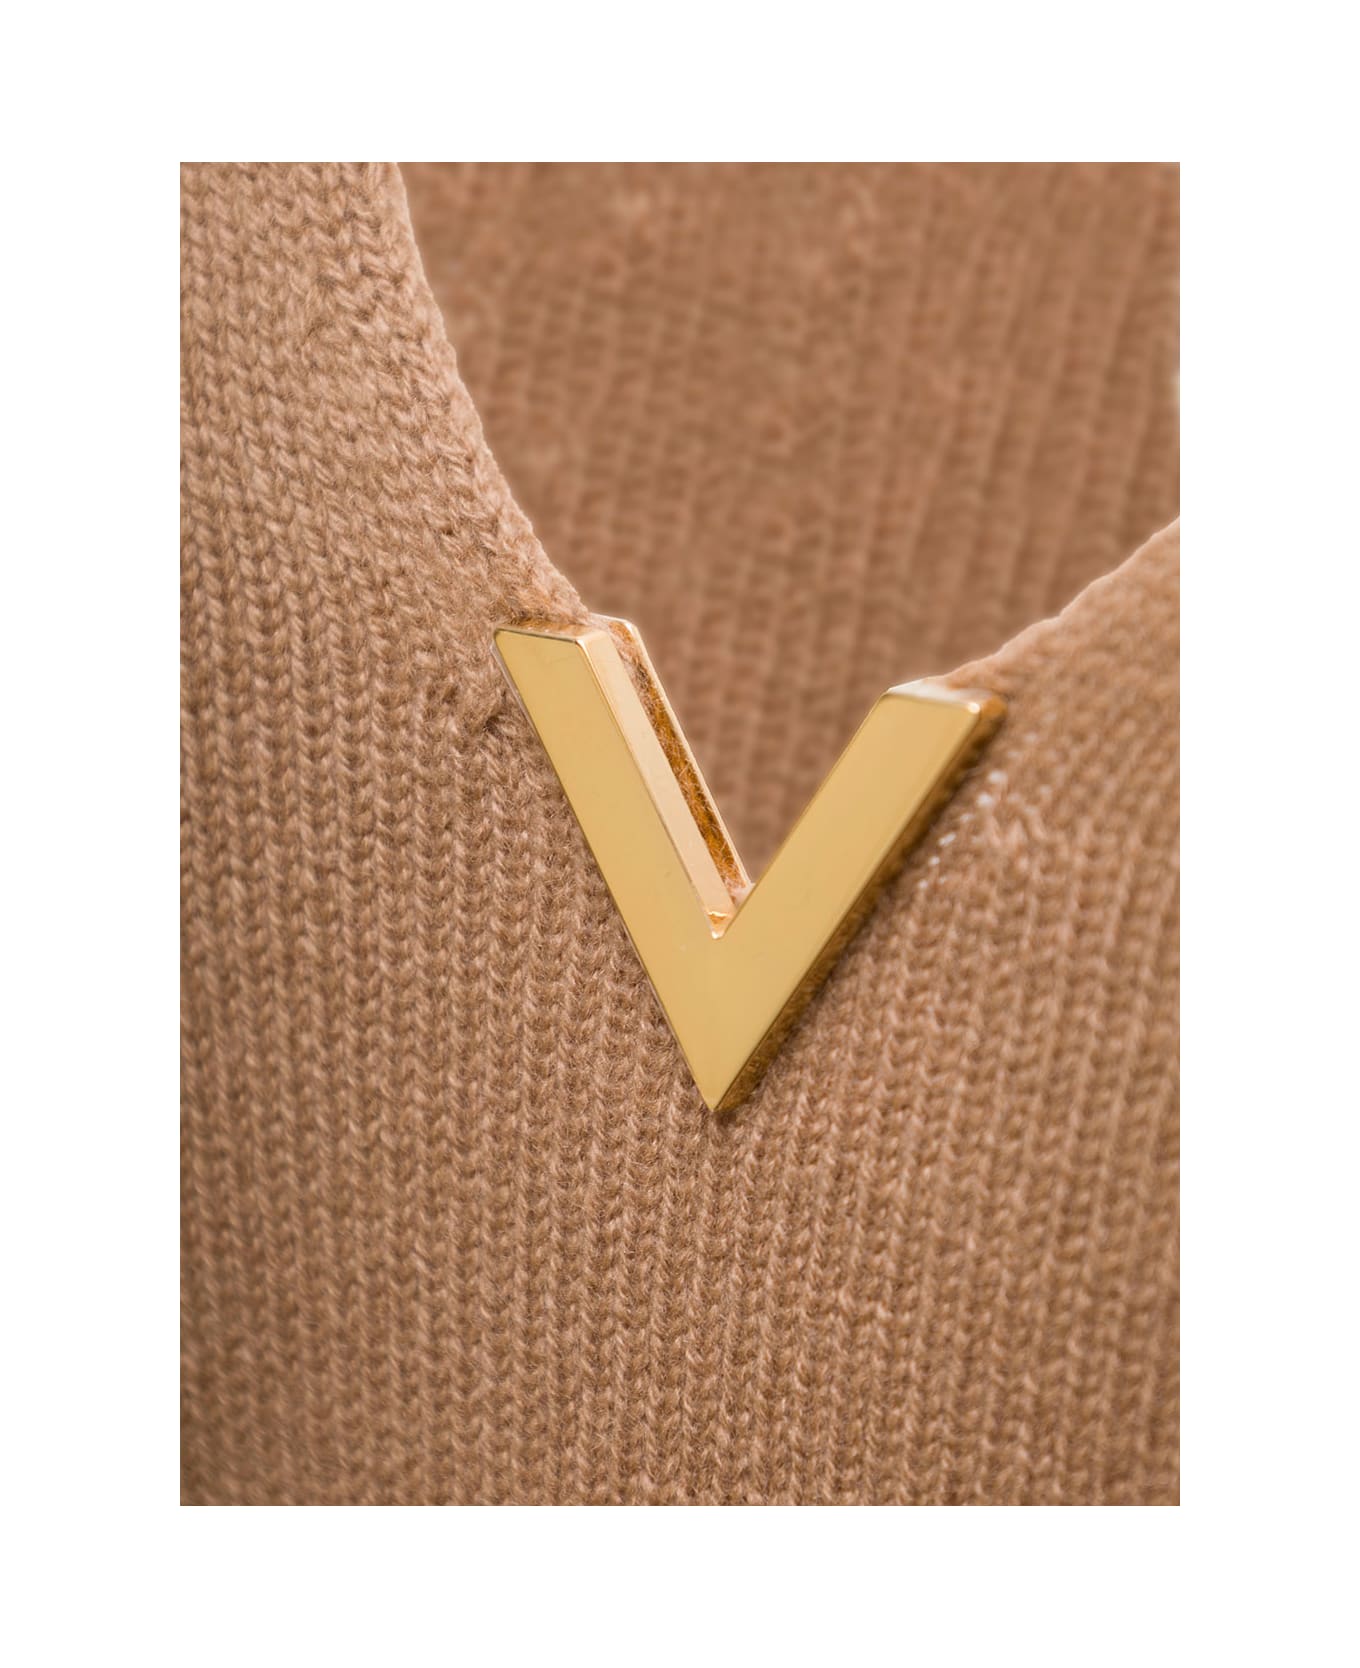 Valentino Brown Cashmere Sweater With V Logo Valentino Woman - Brown